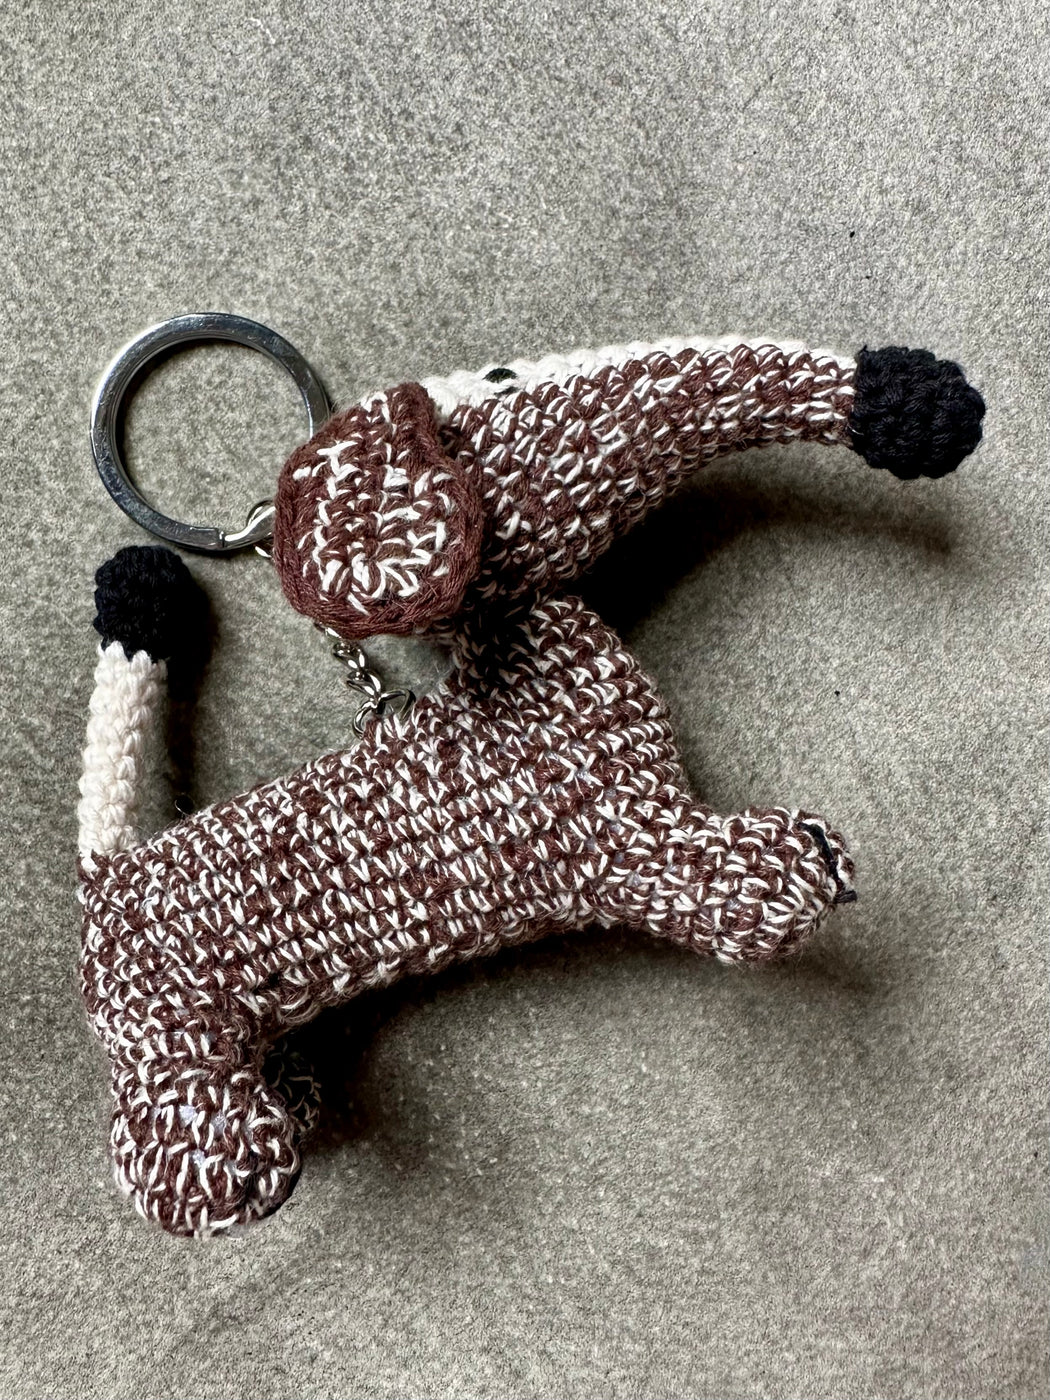 "Dachshund" key ring by Anne-Claire Petit